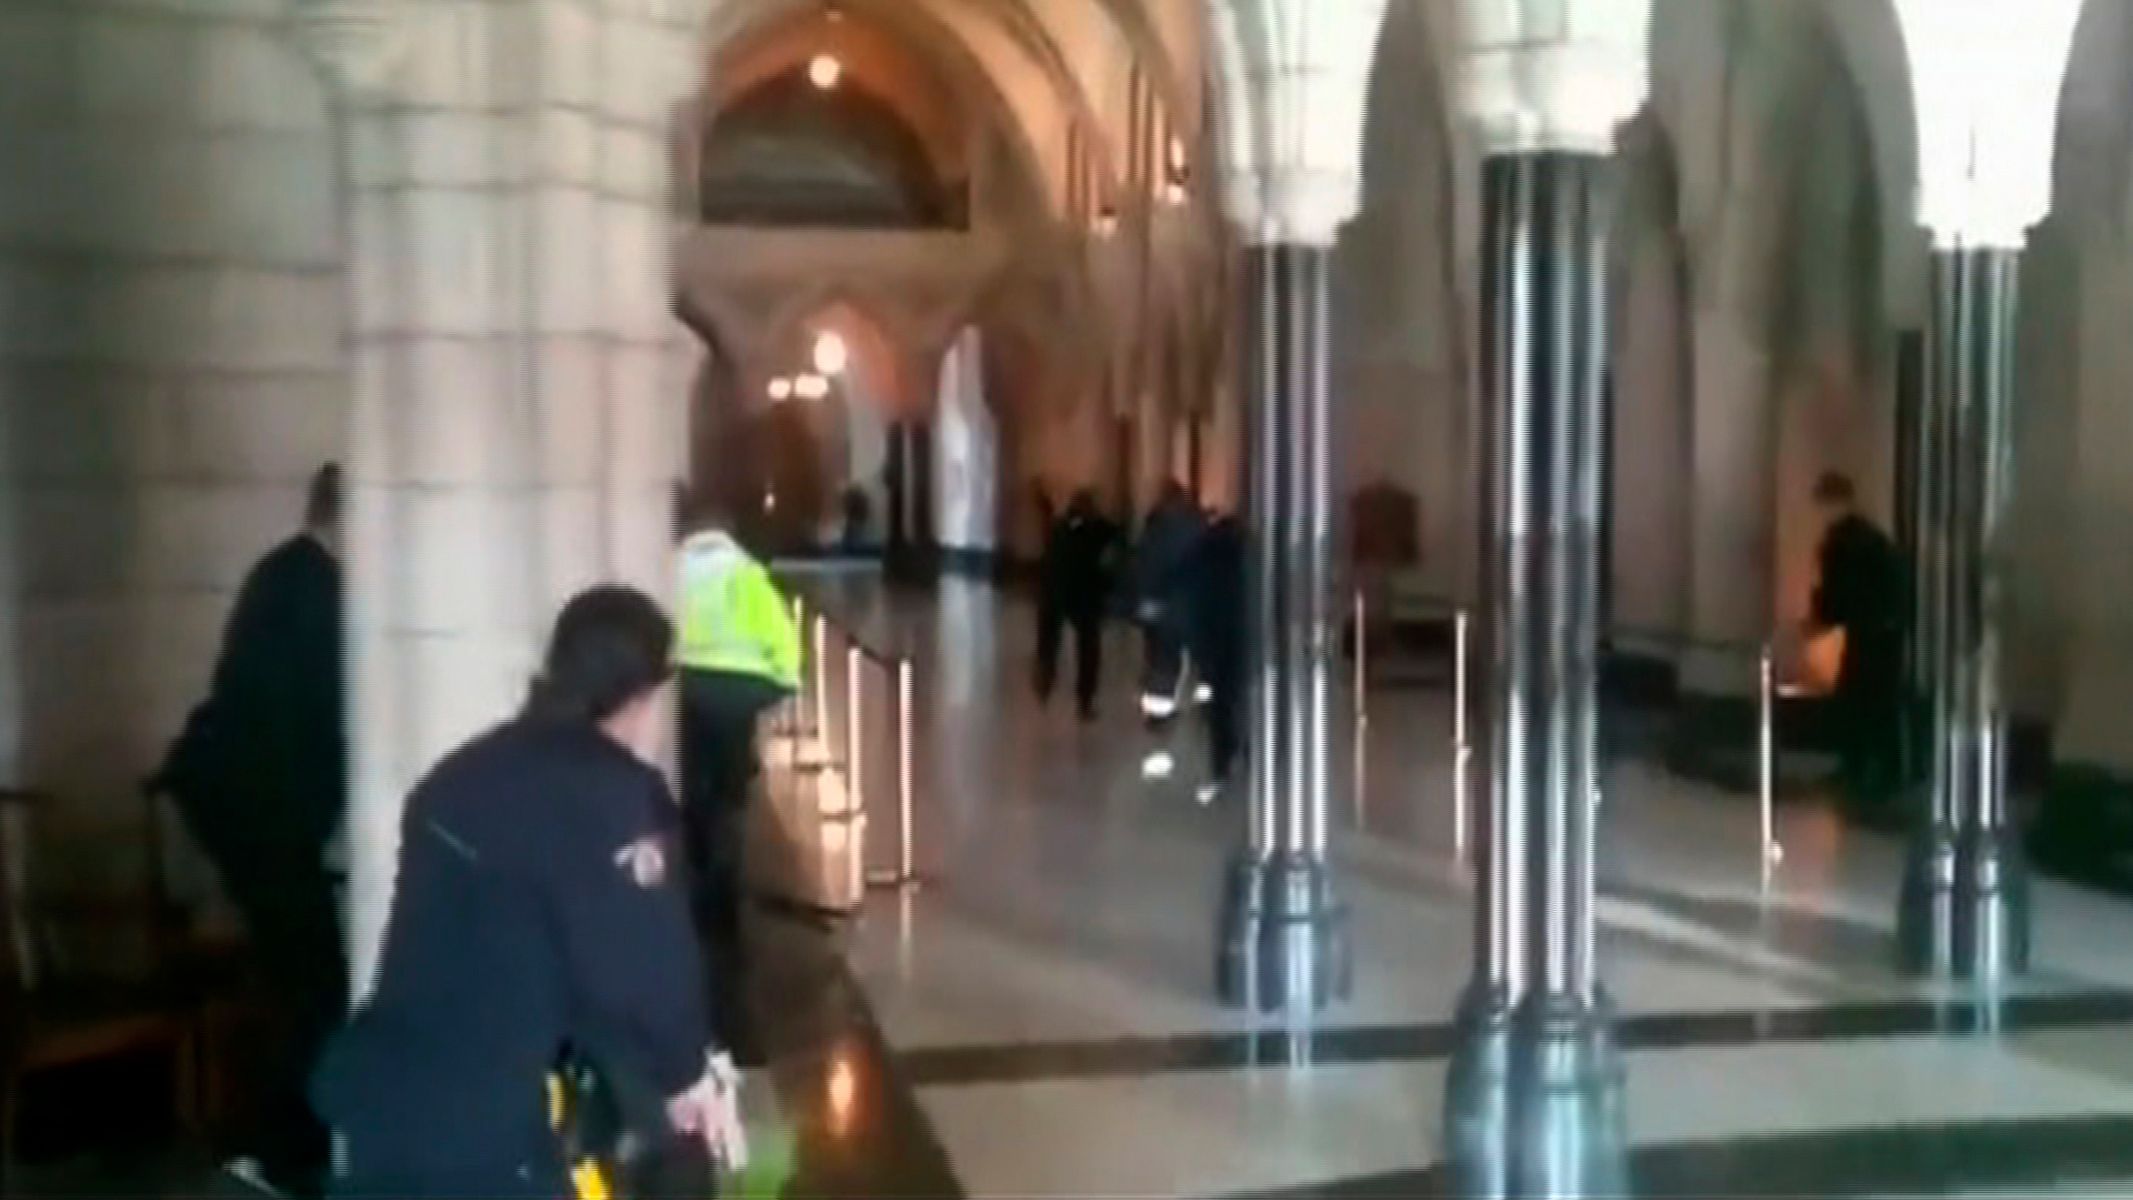 Police officers respond to shooting attacks inside the Centre Block of the Parliament buildings in Ottawa